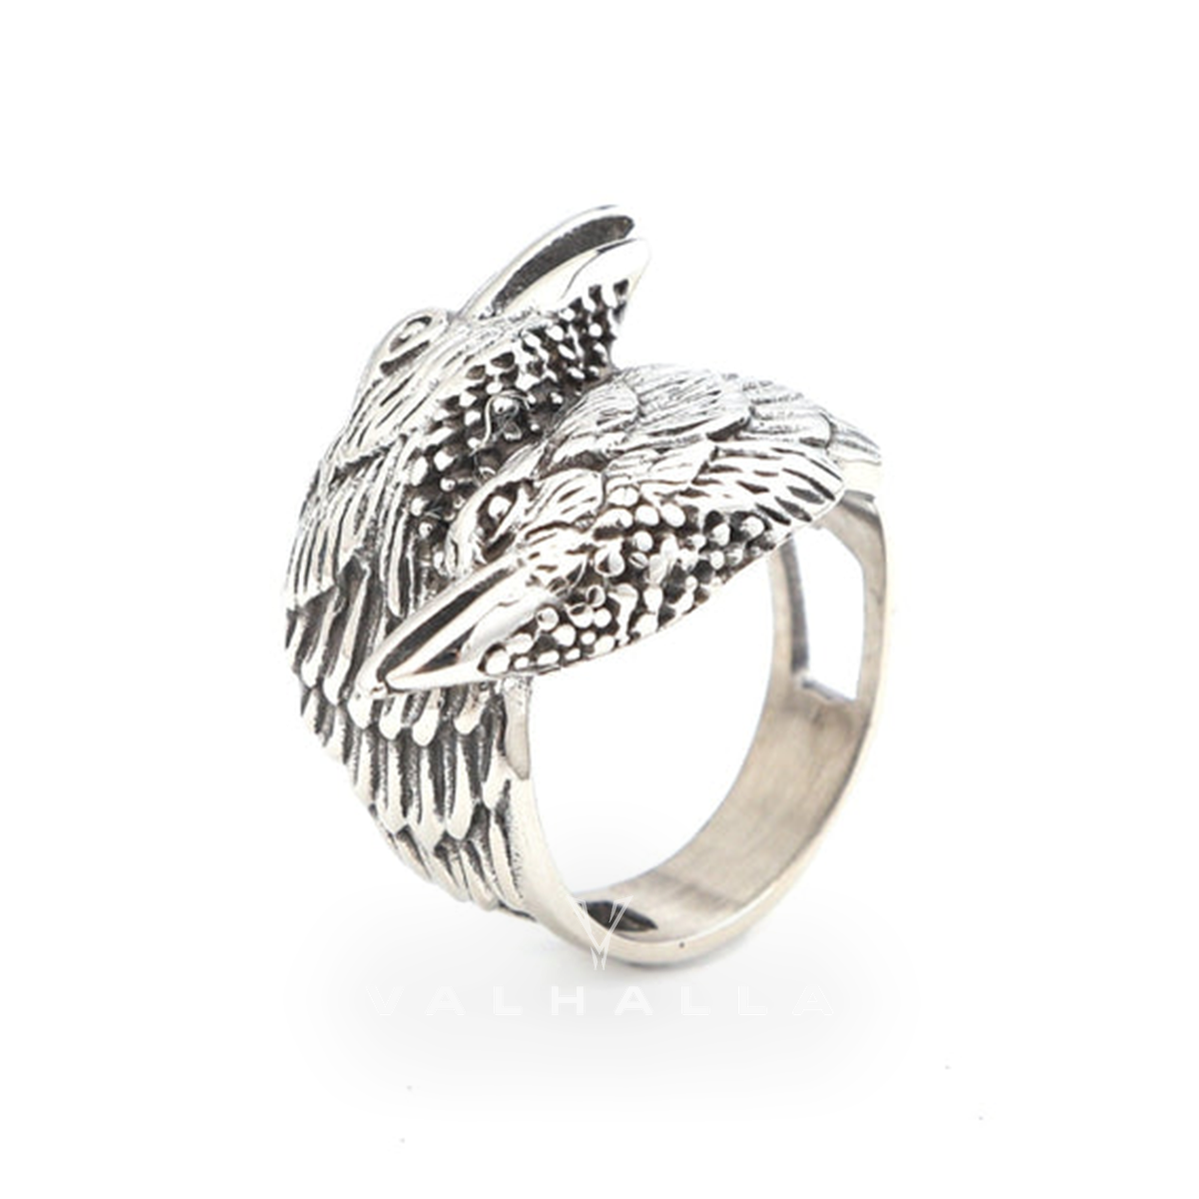 Handcrafted Stainless Steel Twin Raven Ring